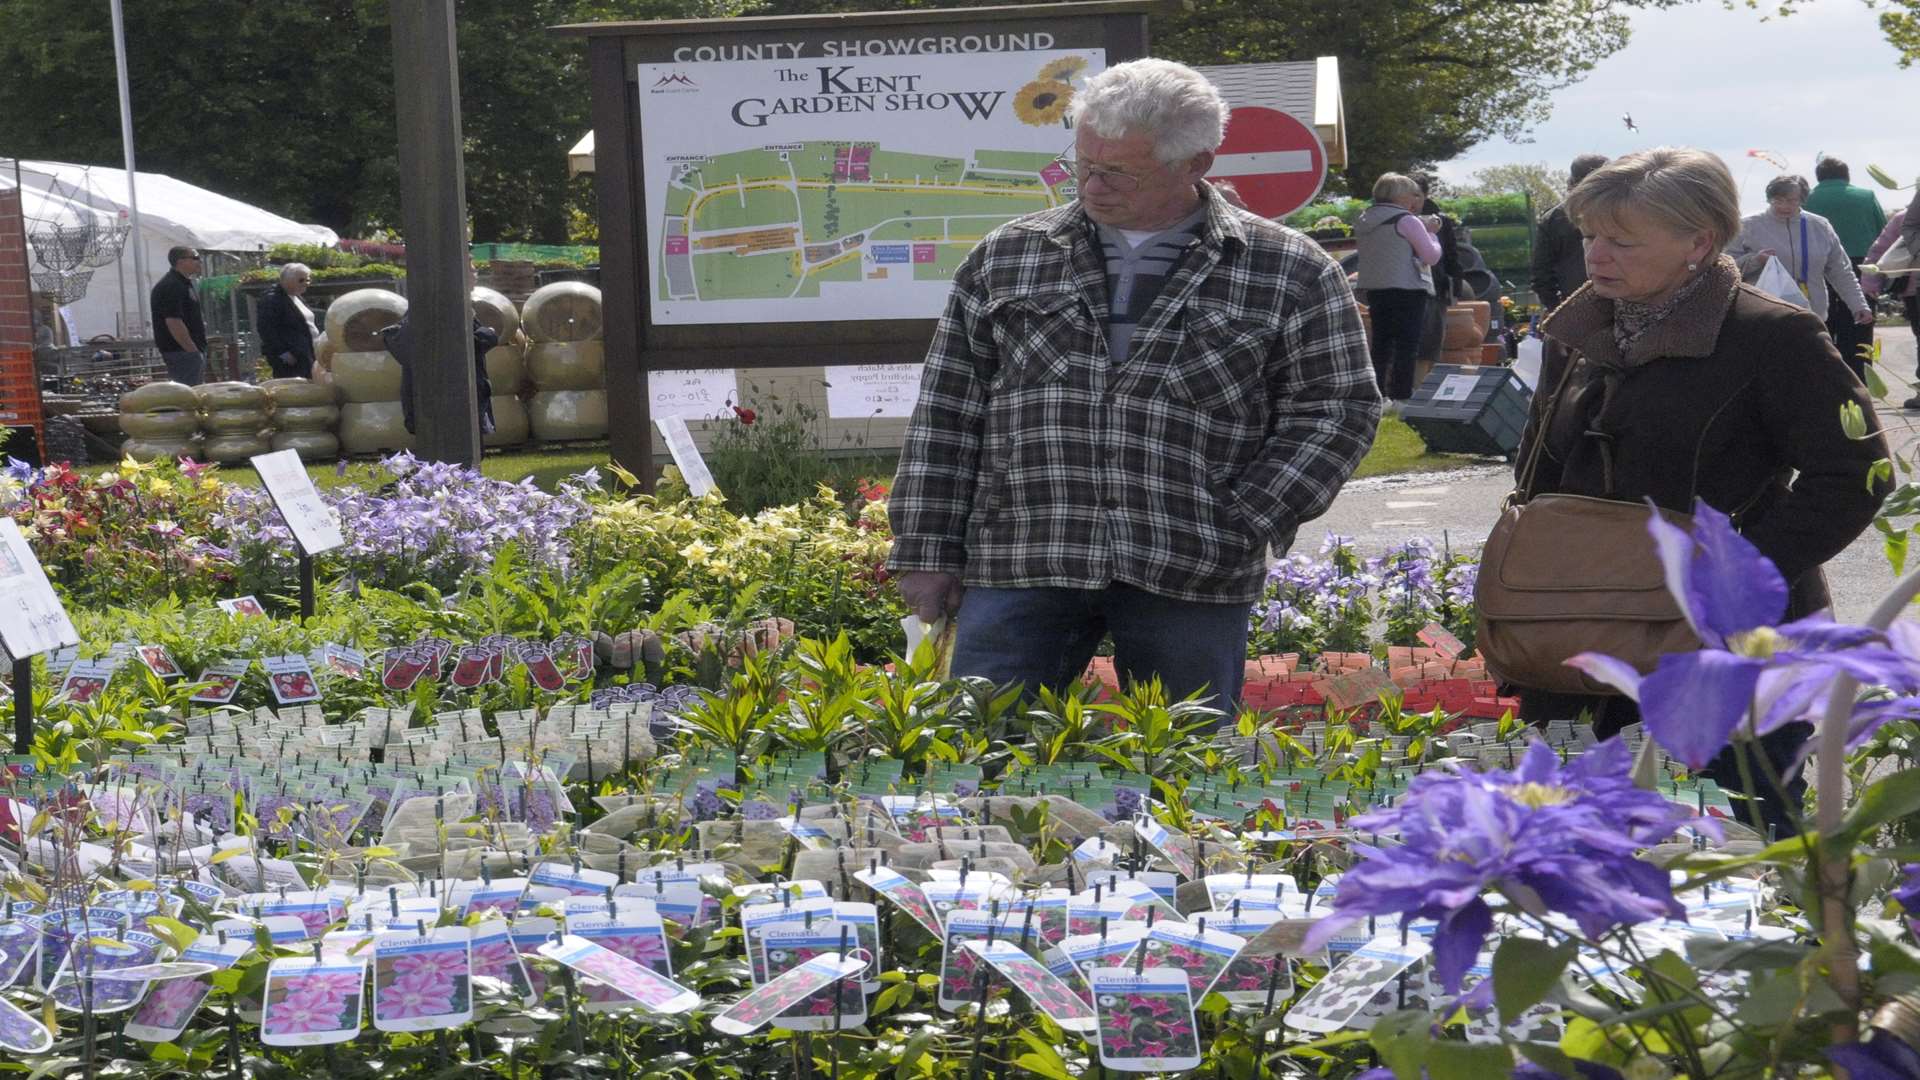 The Kent Garden Show is an annual event attracting exhibitors from across the country